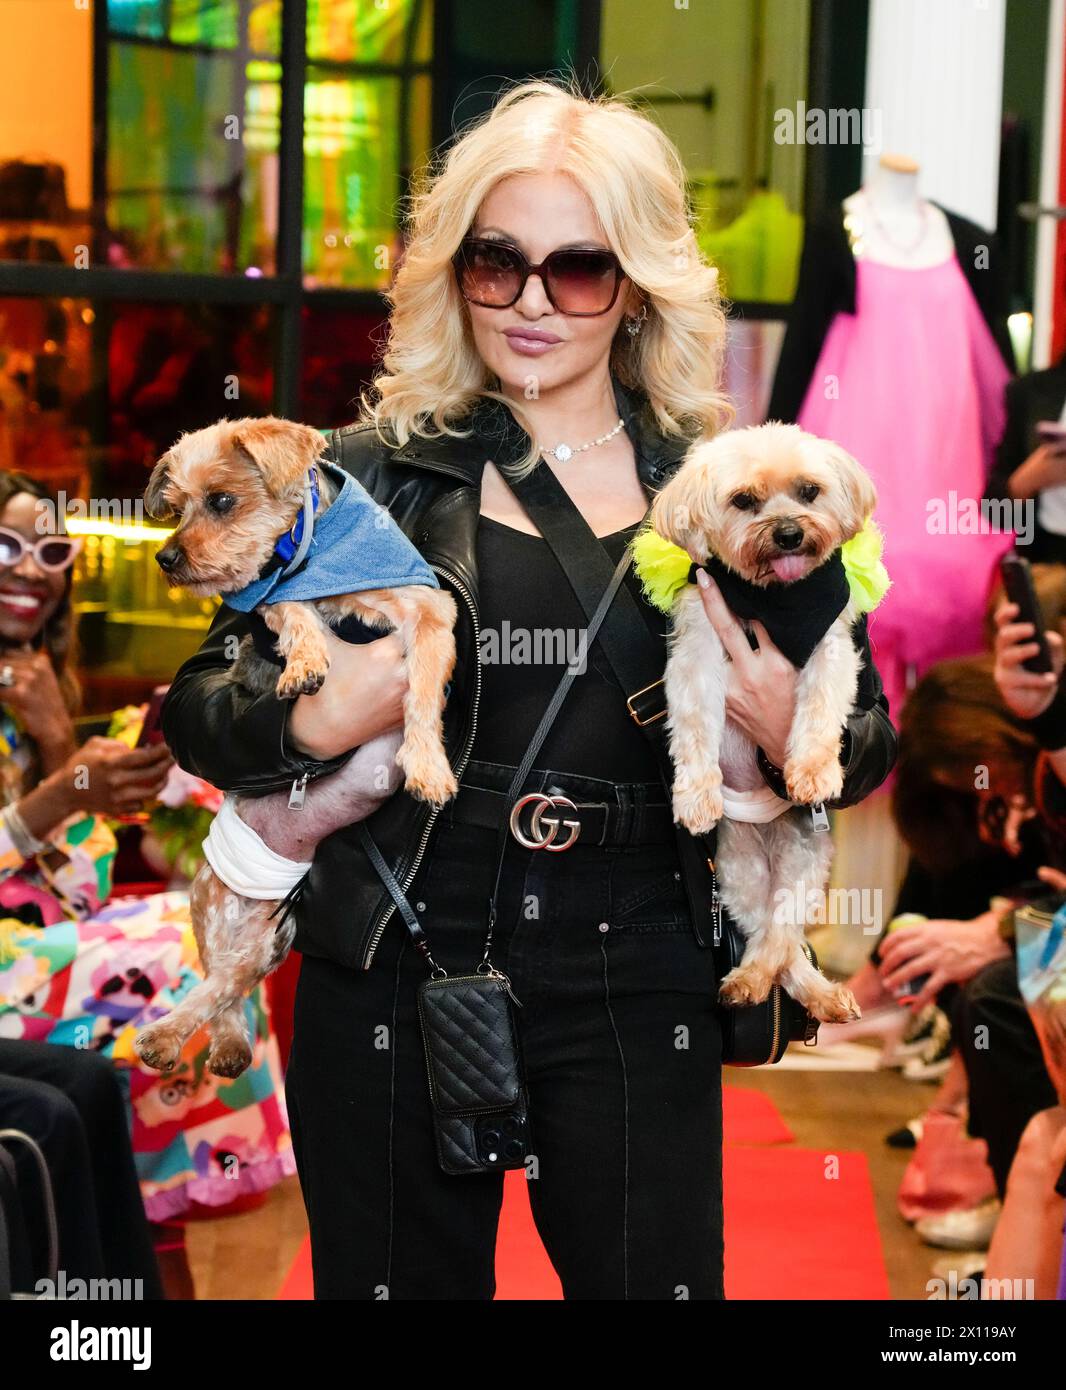 New York, Usa. April 2024. Orfeh nimmt an der Patricia Field X Charlie Rescue Dog Runway Show mit Hundeschmustern von Kiss the Dogs NYC Teil, die am Sonntag, den 14. April 2024, im Flying Solo Store in New York City stattfindet. Quelle: Jennifer Graylock/Alamy Live News Stockfoto